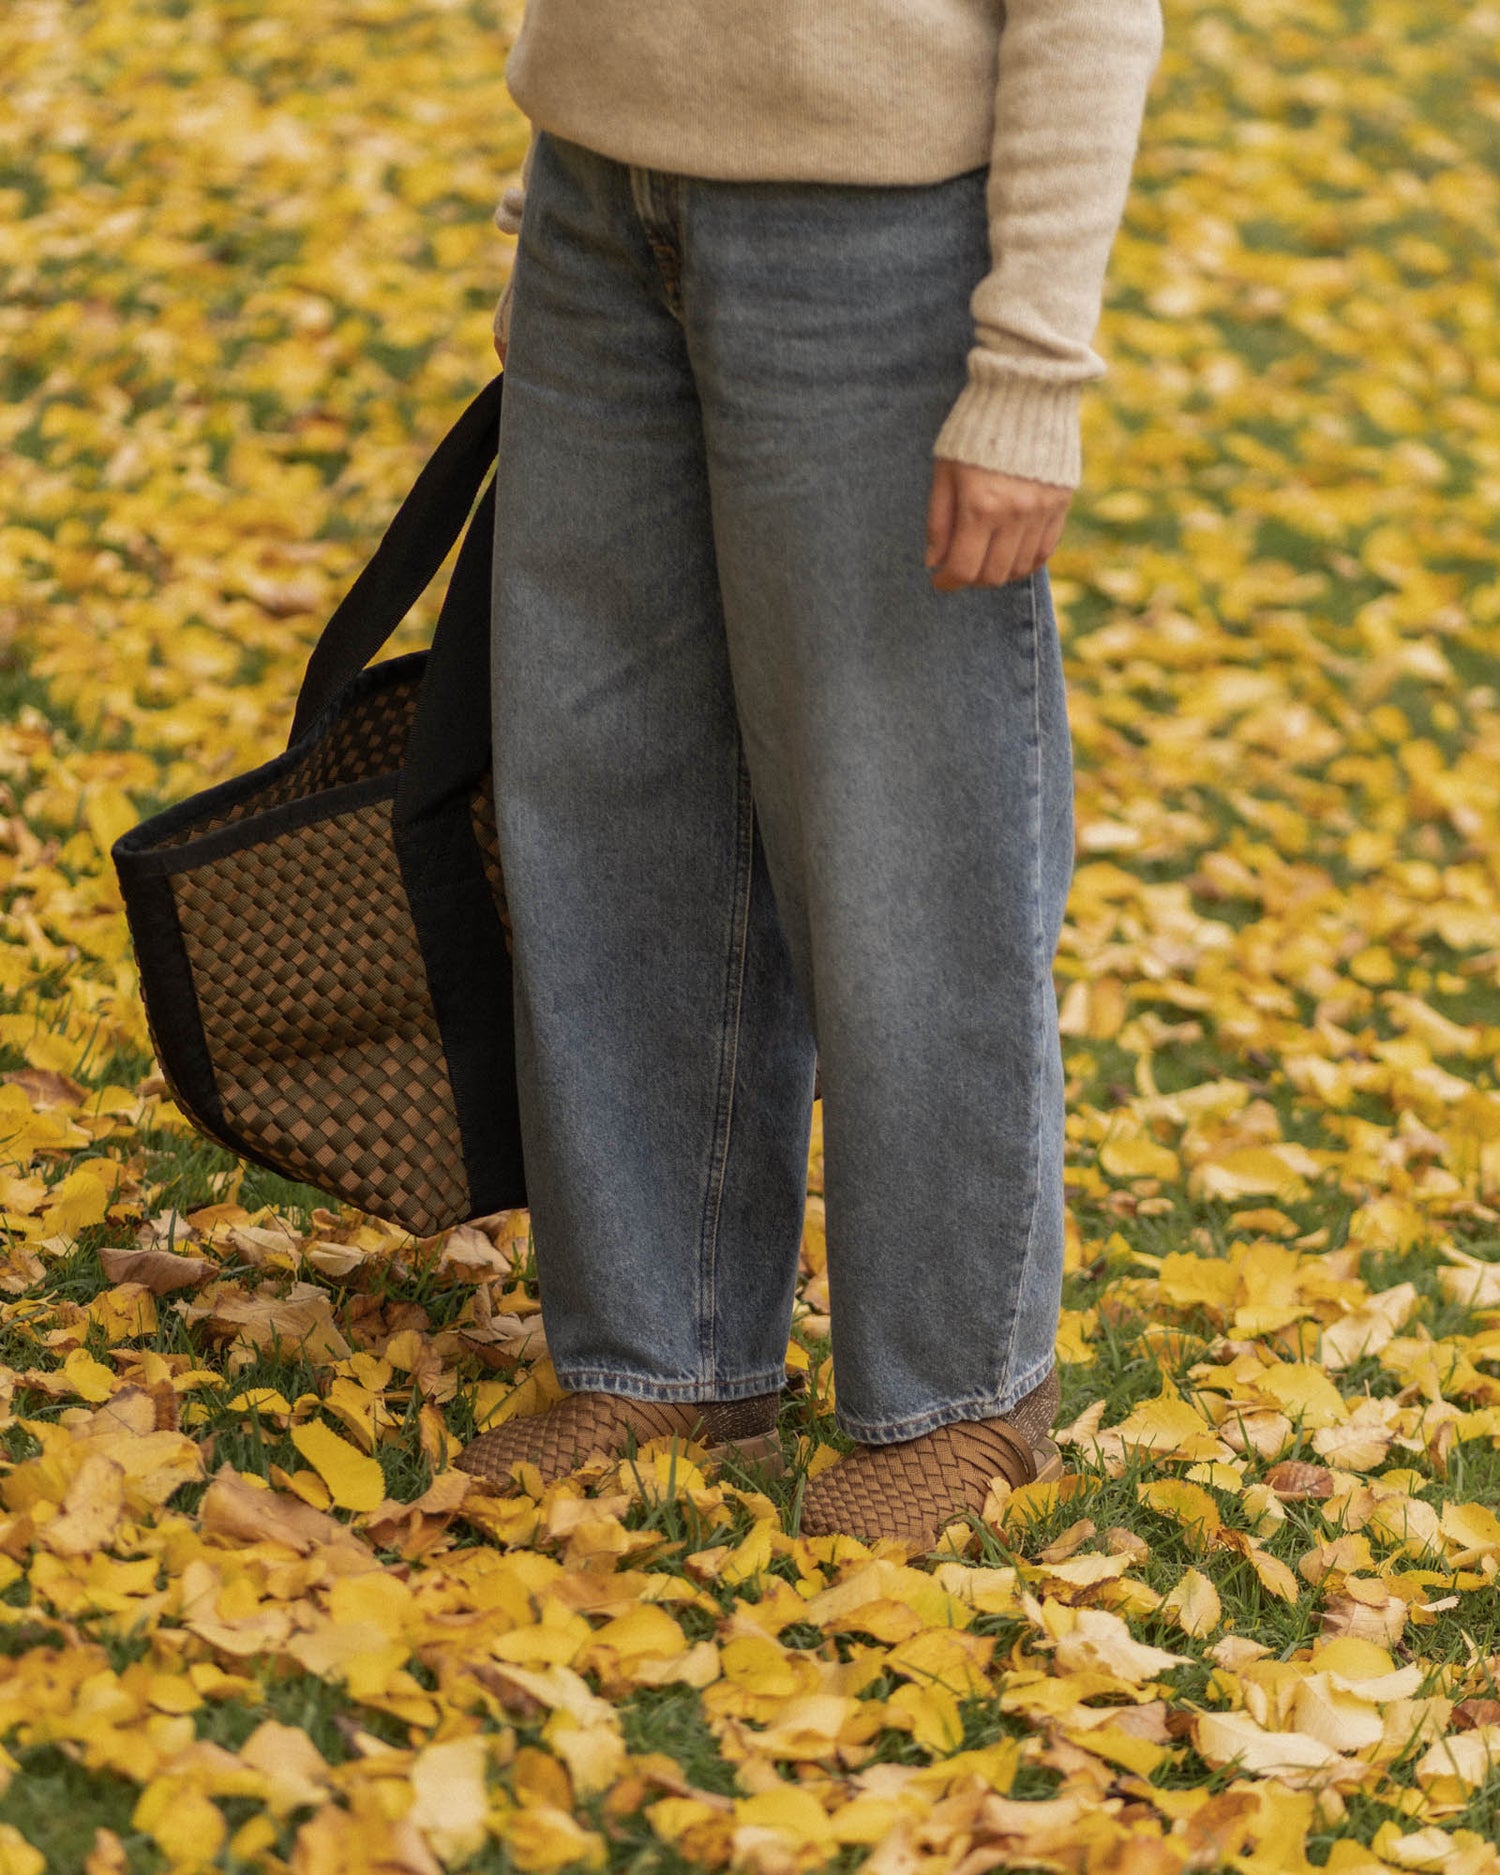 Image of a person standing on a bed of leaves holding Malibu sandals Weekender hand woven tote bag in olive black while also wearing the colony closed toe sandals in Coyote. 